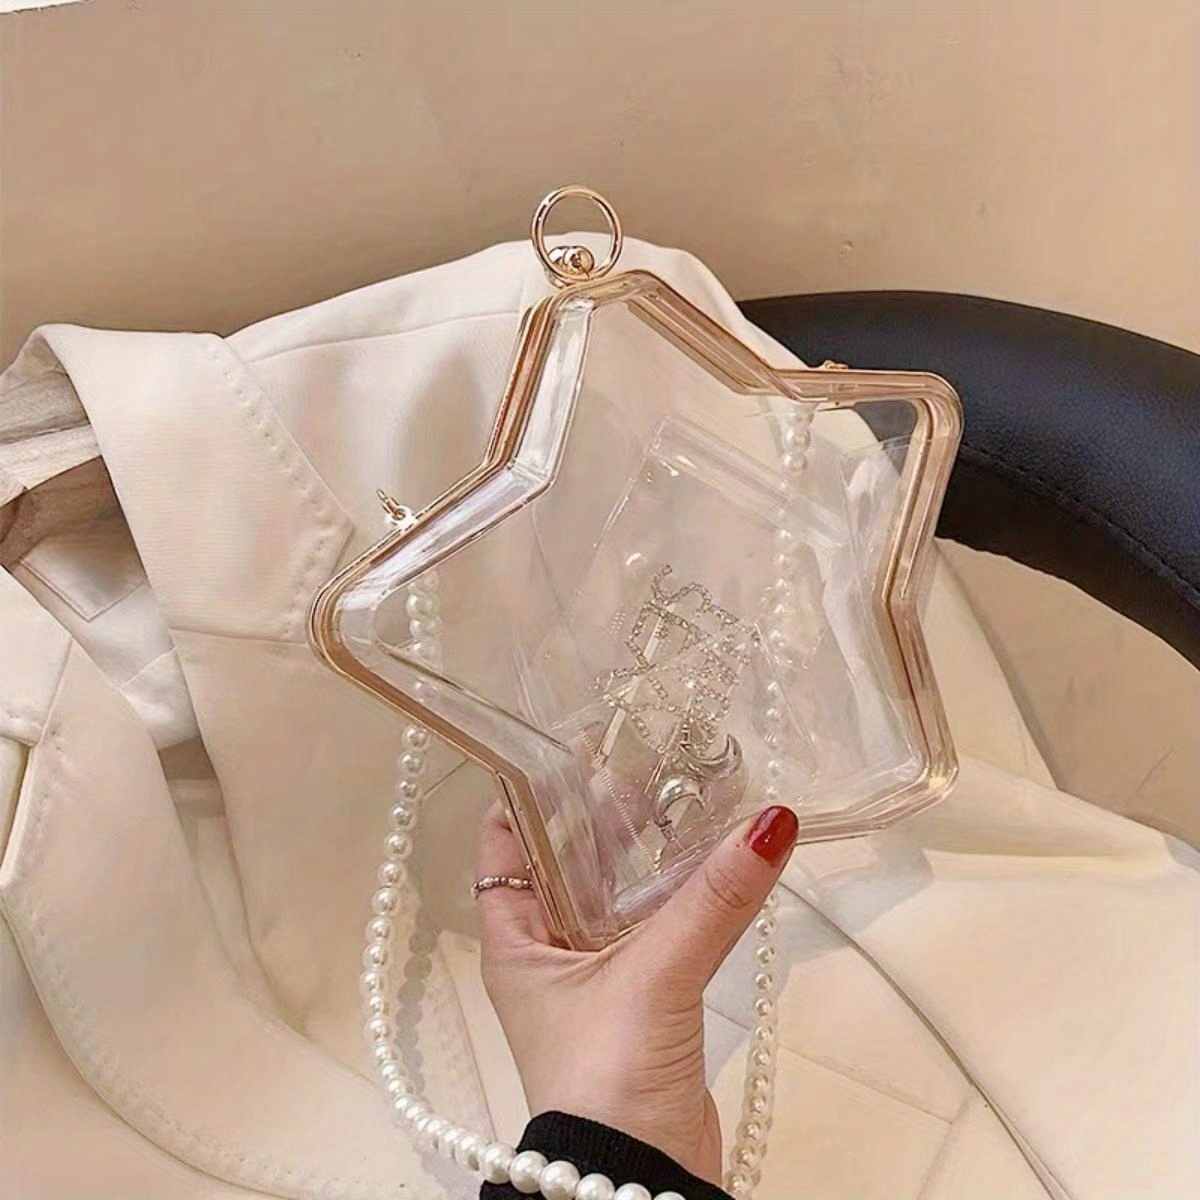 1pc Acrylic Evening Handbag With Cracked Ice Pattern, Silver Chain